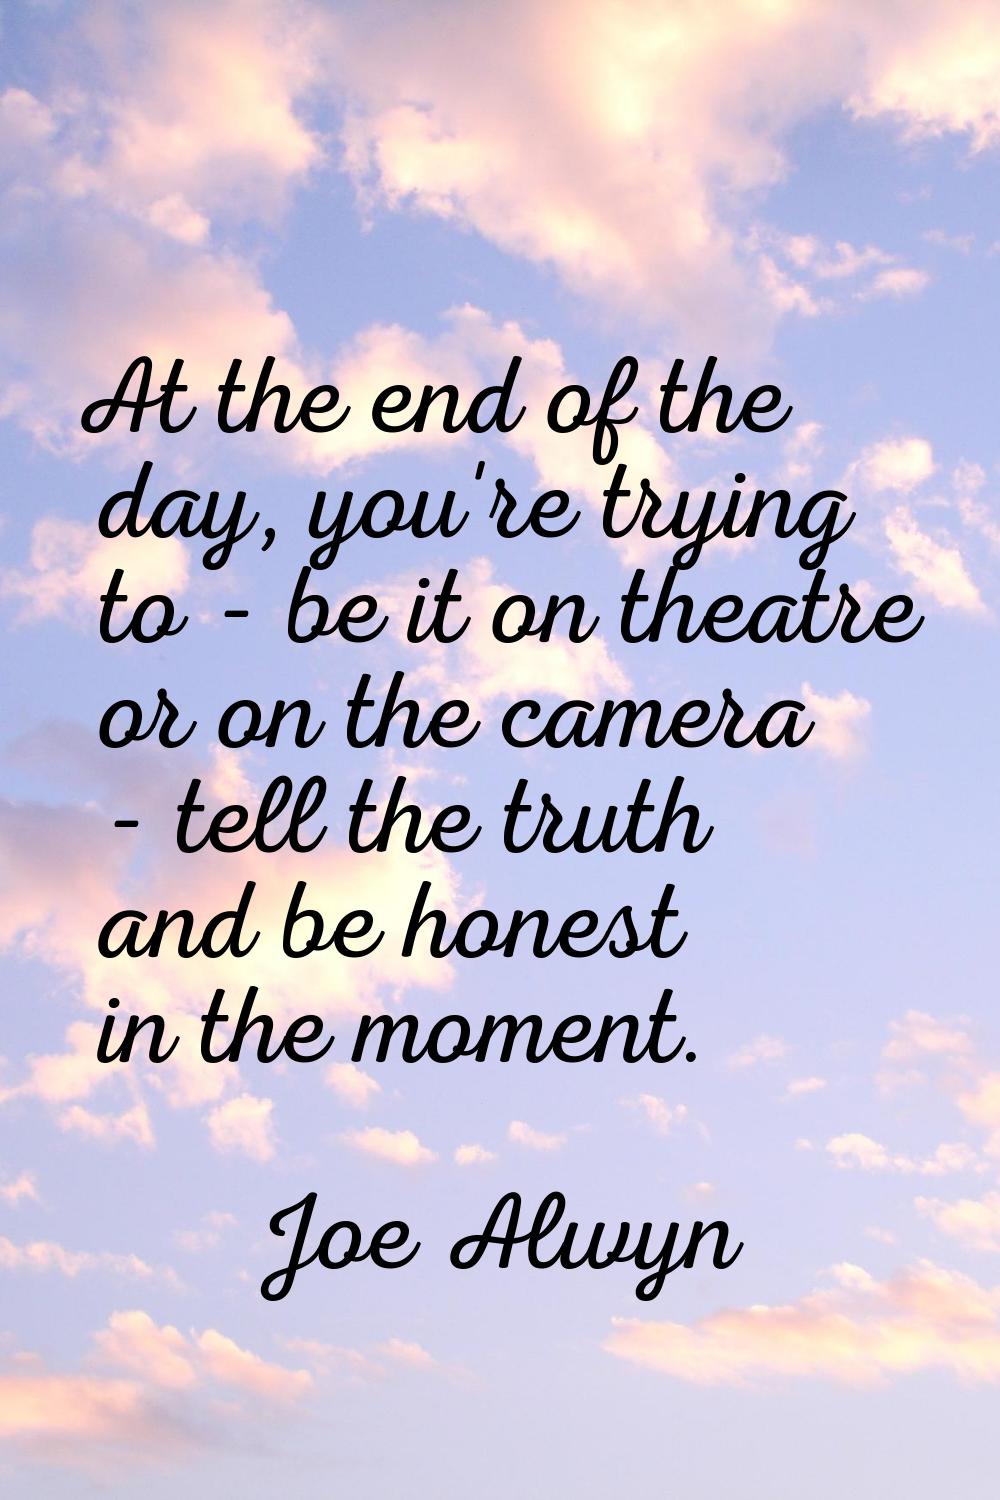 At the end of the day, you're trying to - be it on theatre or on the camera - tell the truth and be